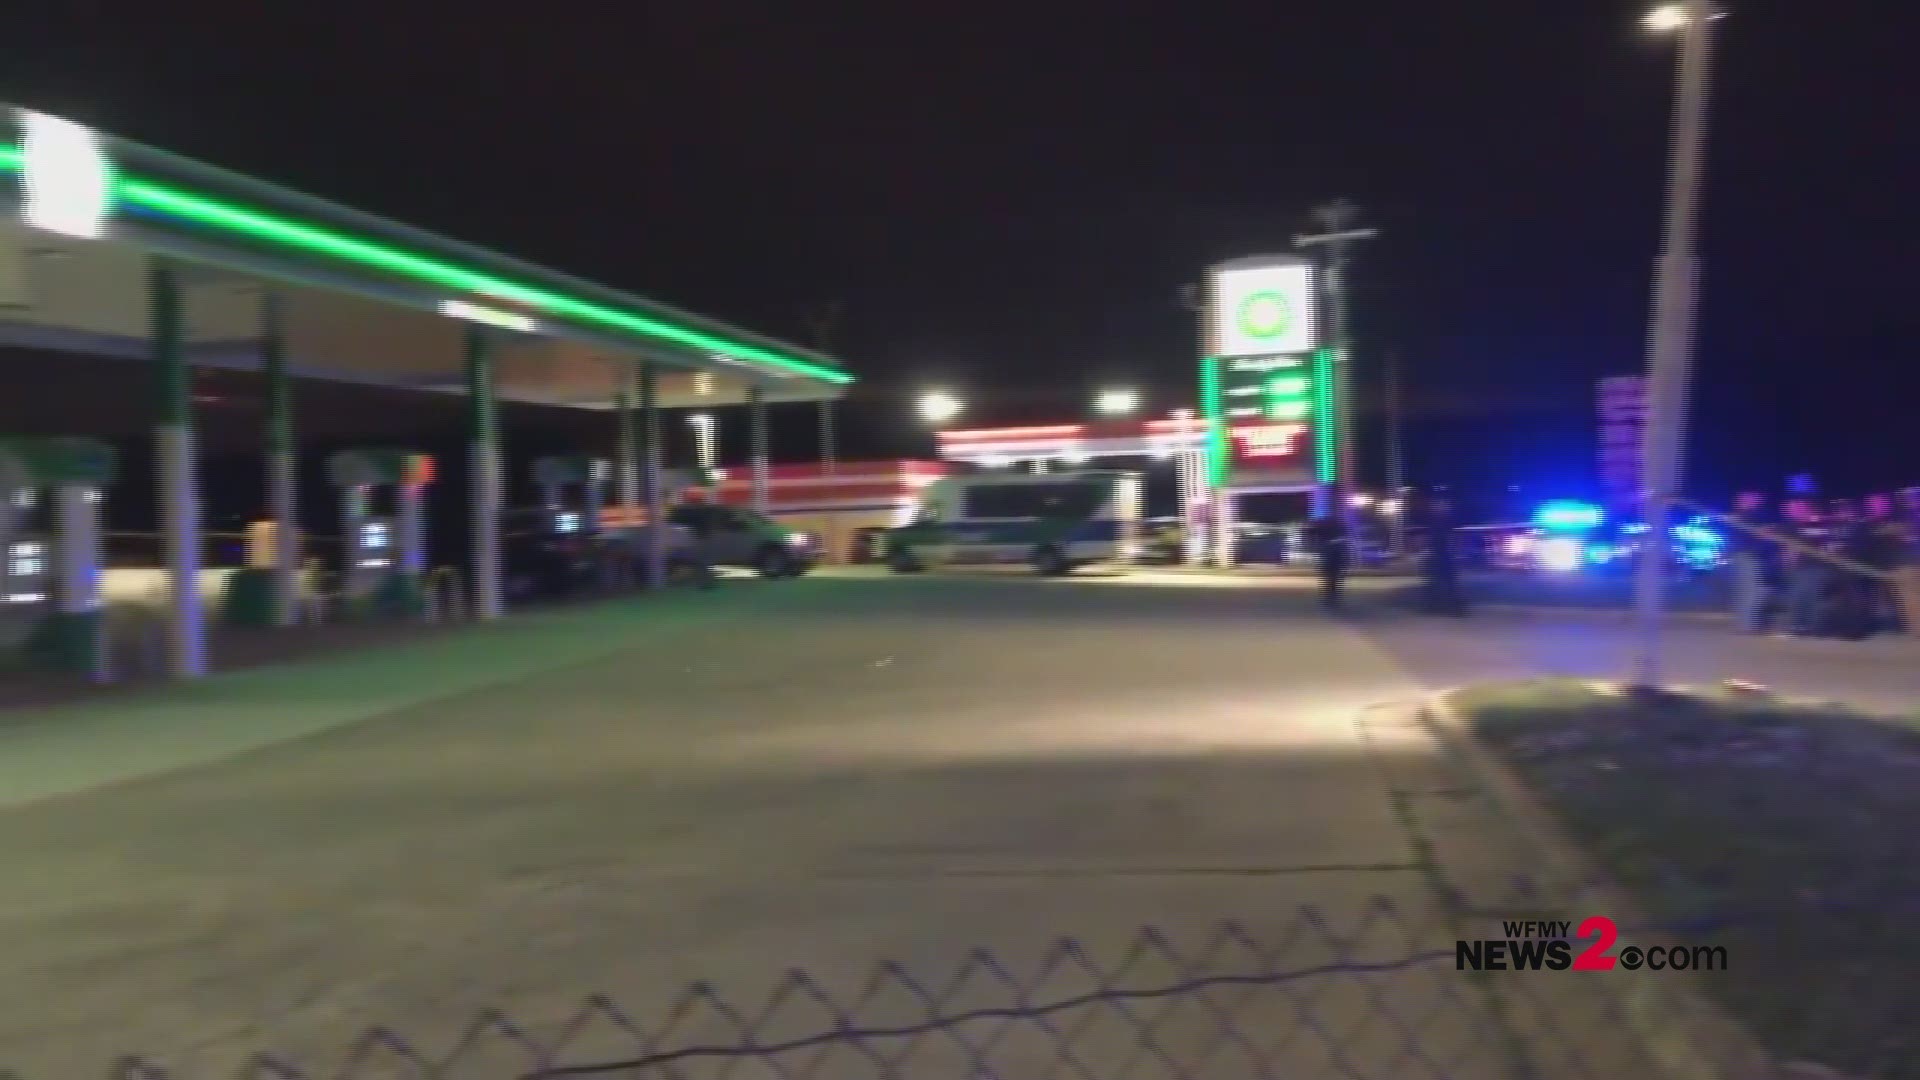 Police say a person was shot and killed at the BP on Gate City Blvd Wednesday night.